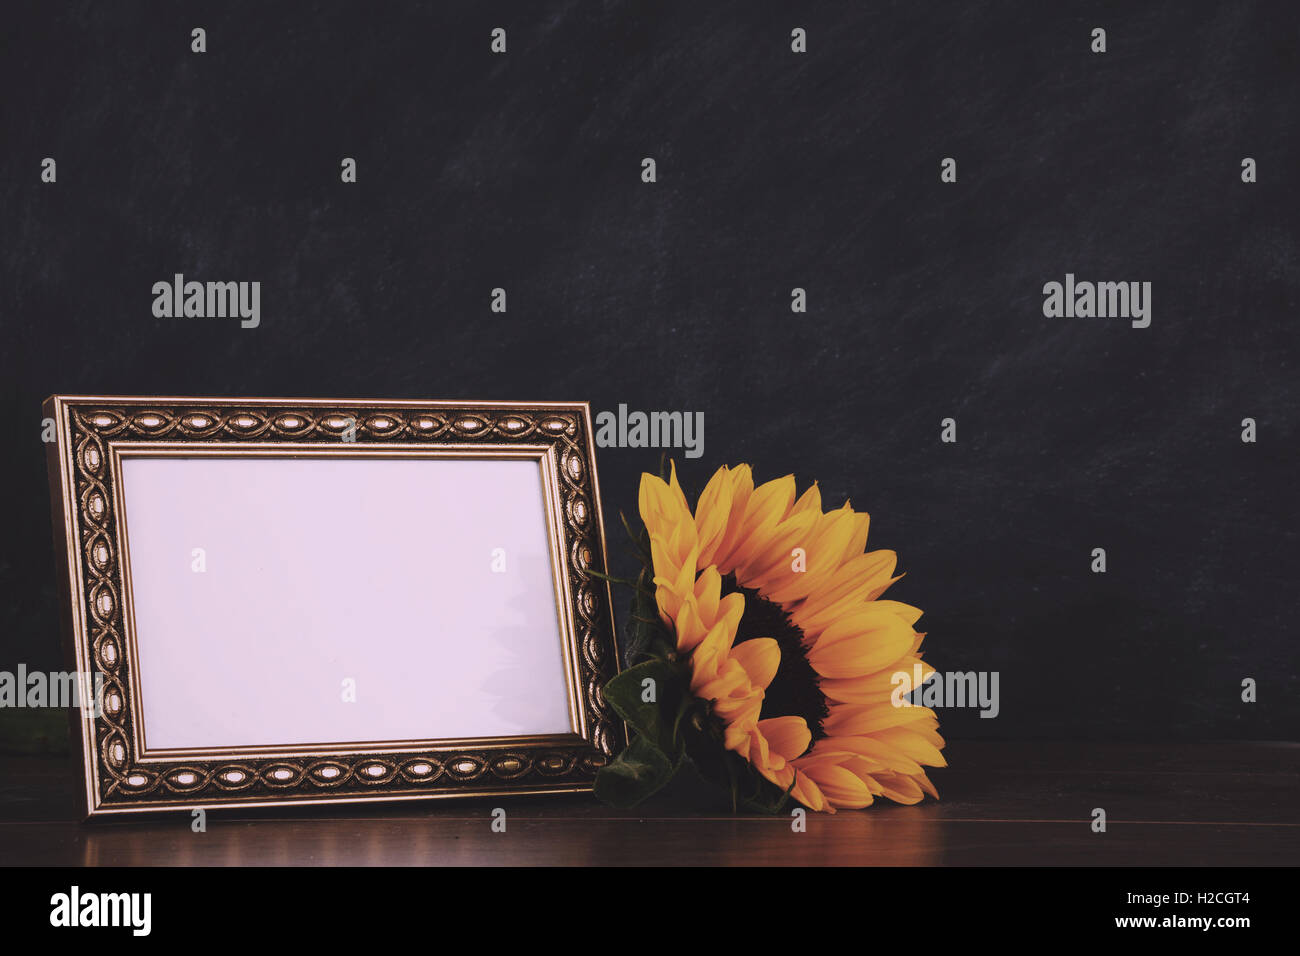 Old picture frame and sunflower against a dirty blackboard background Vintage Retro Filter. Stock Photo